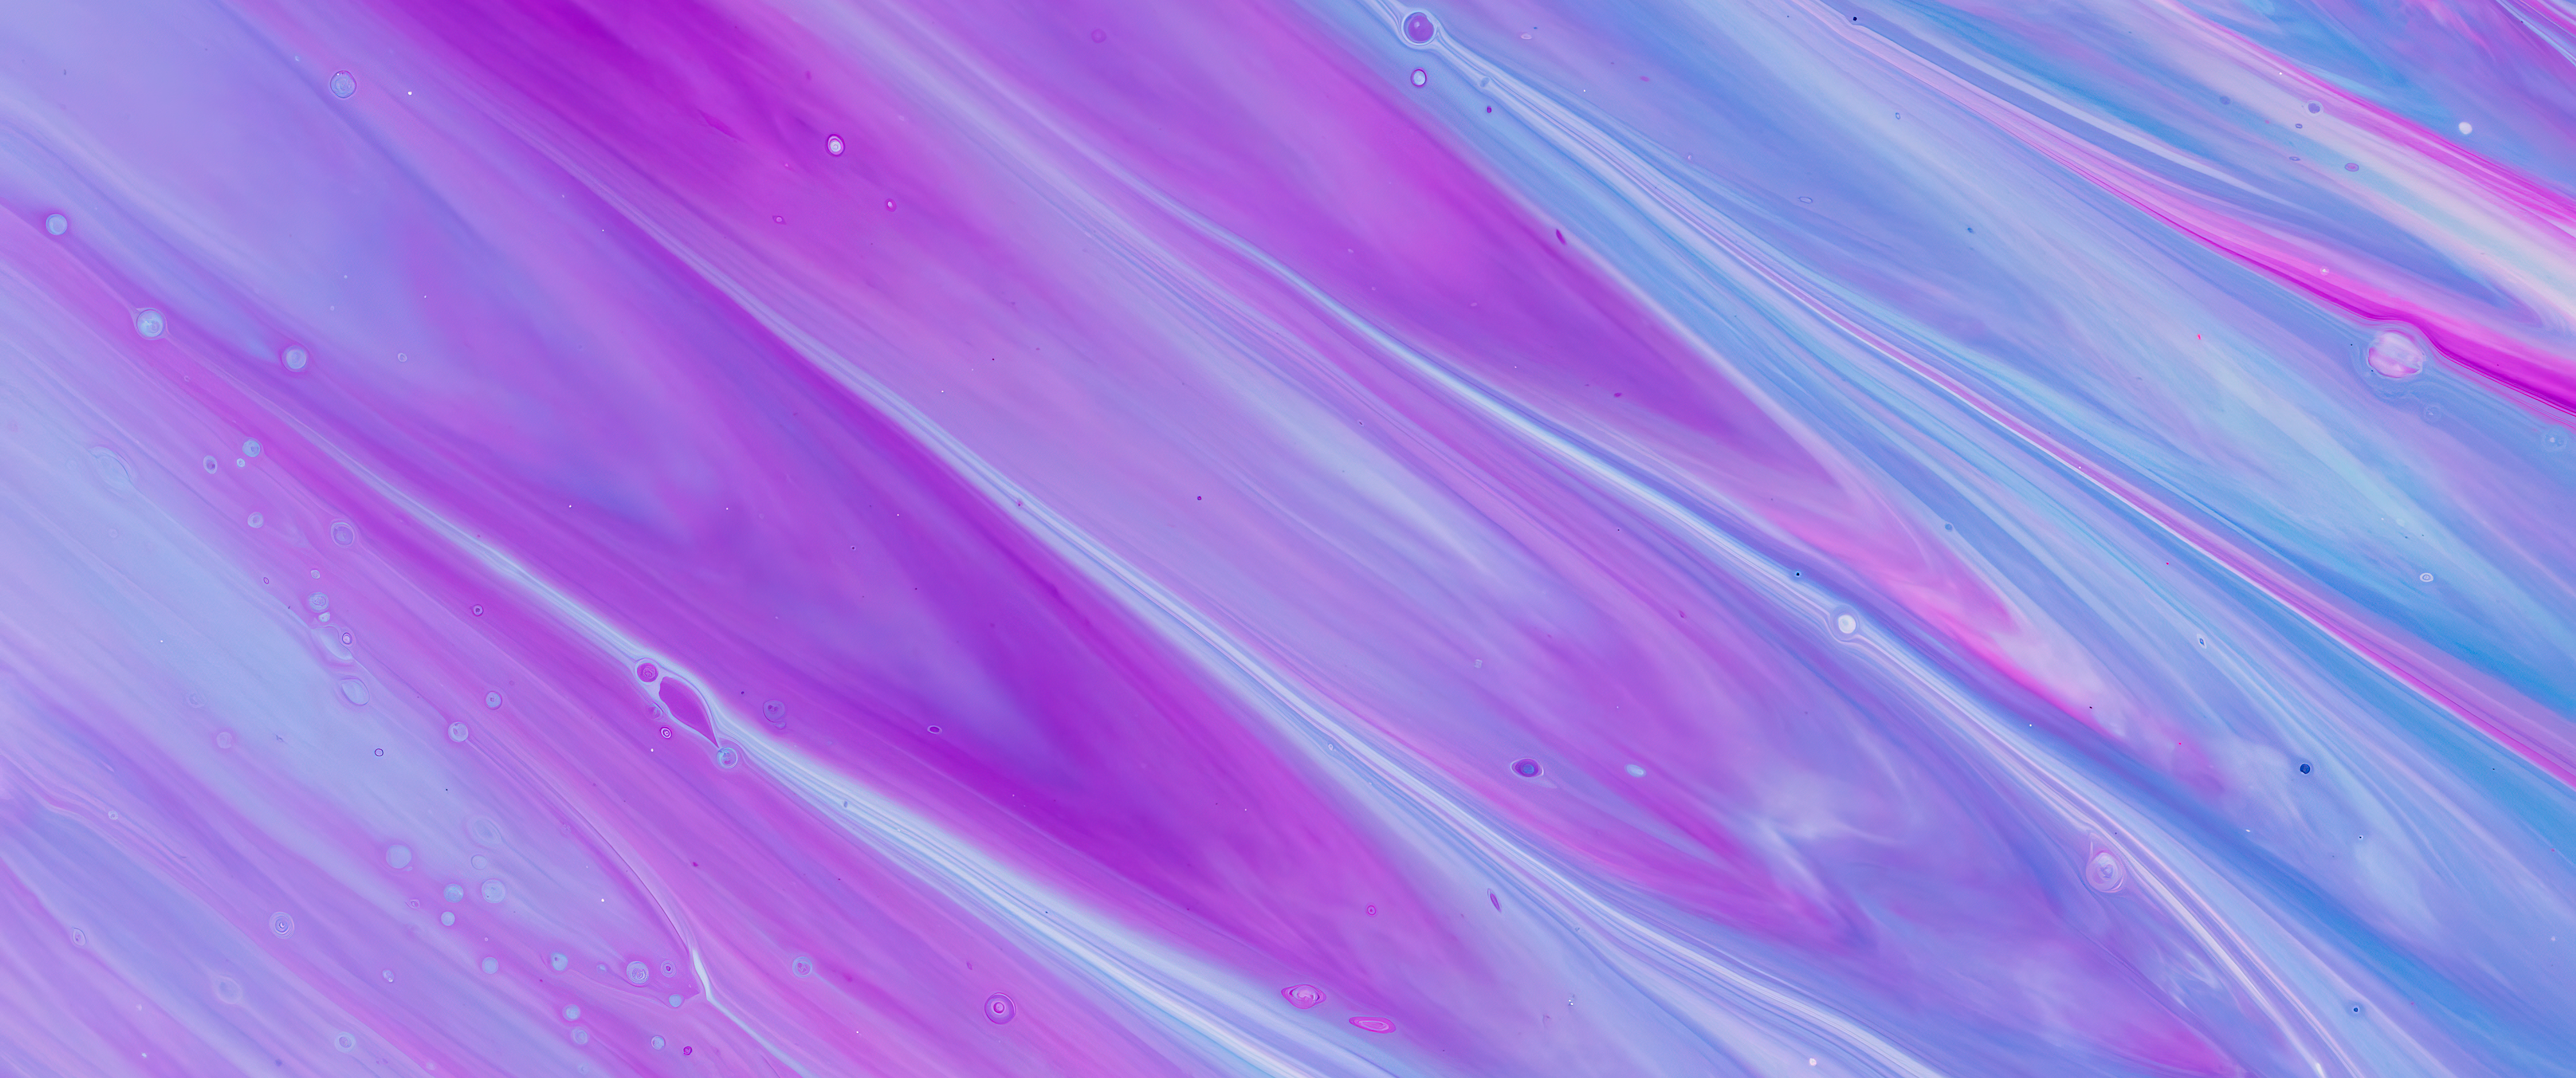 General 5160x2160 abstract psychedelic trippy